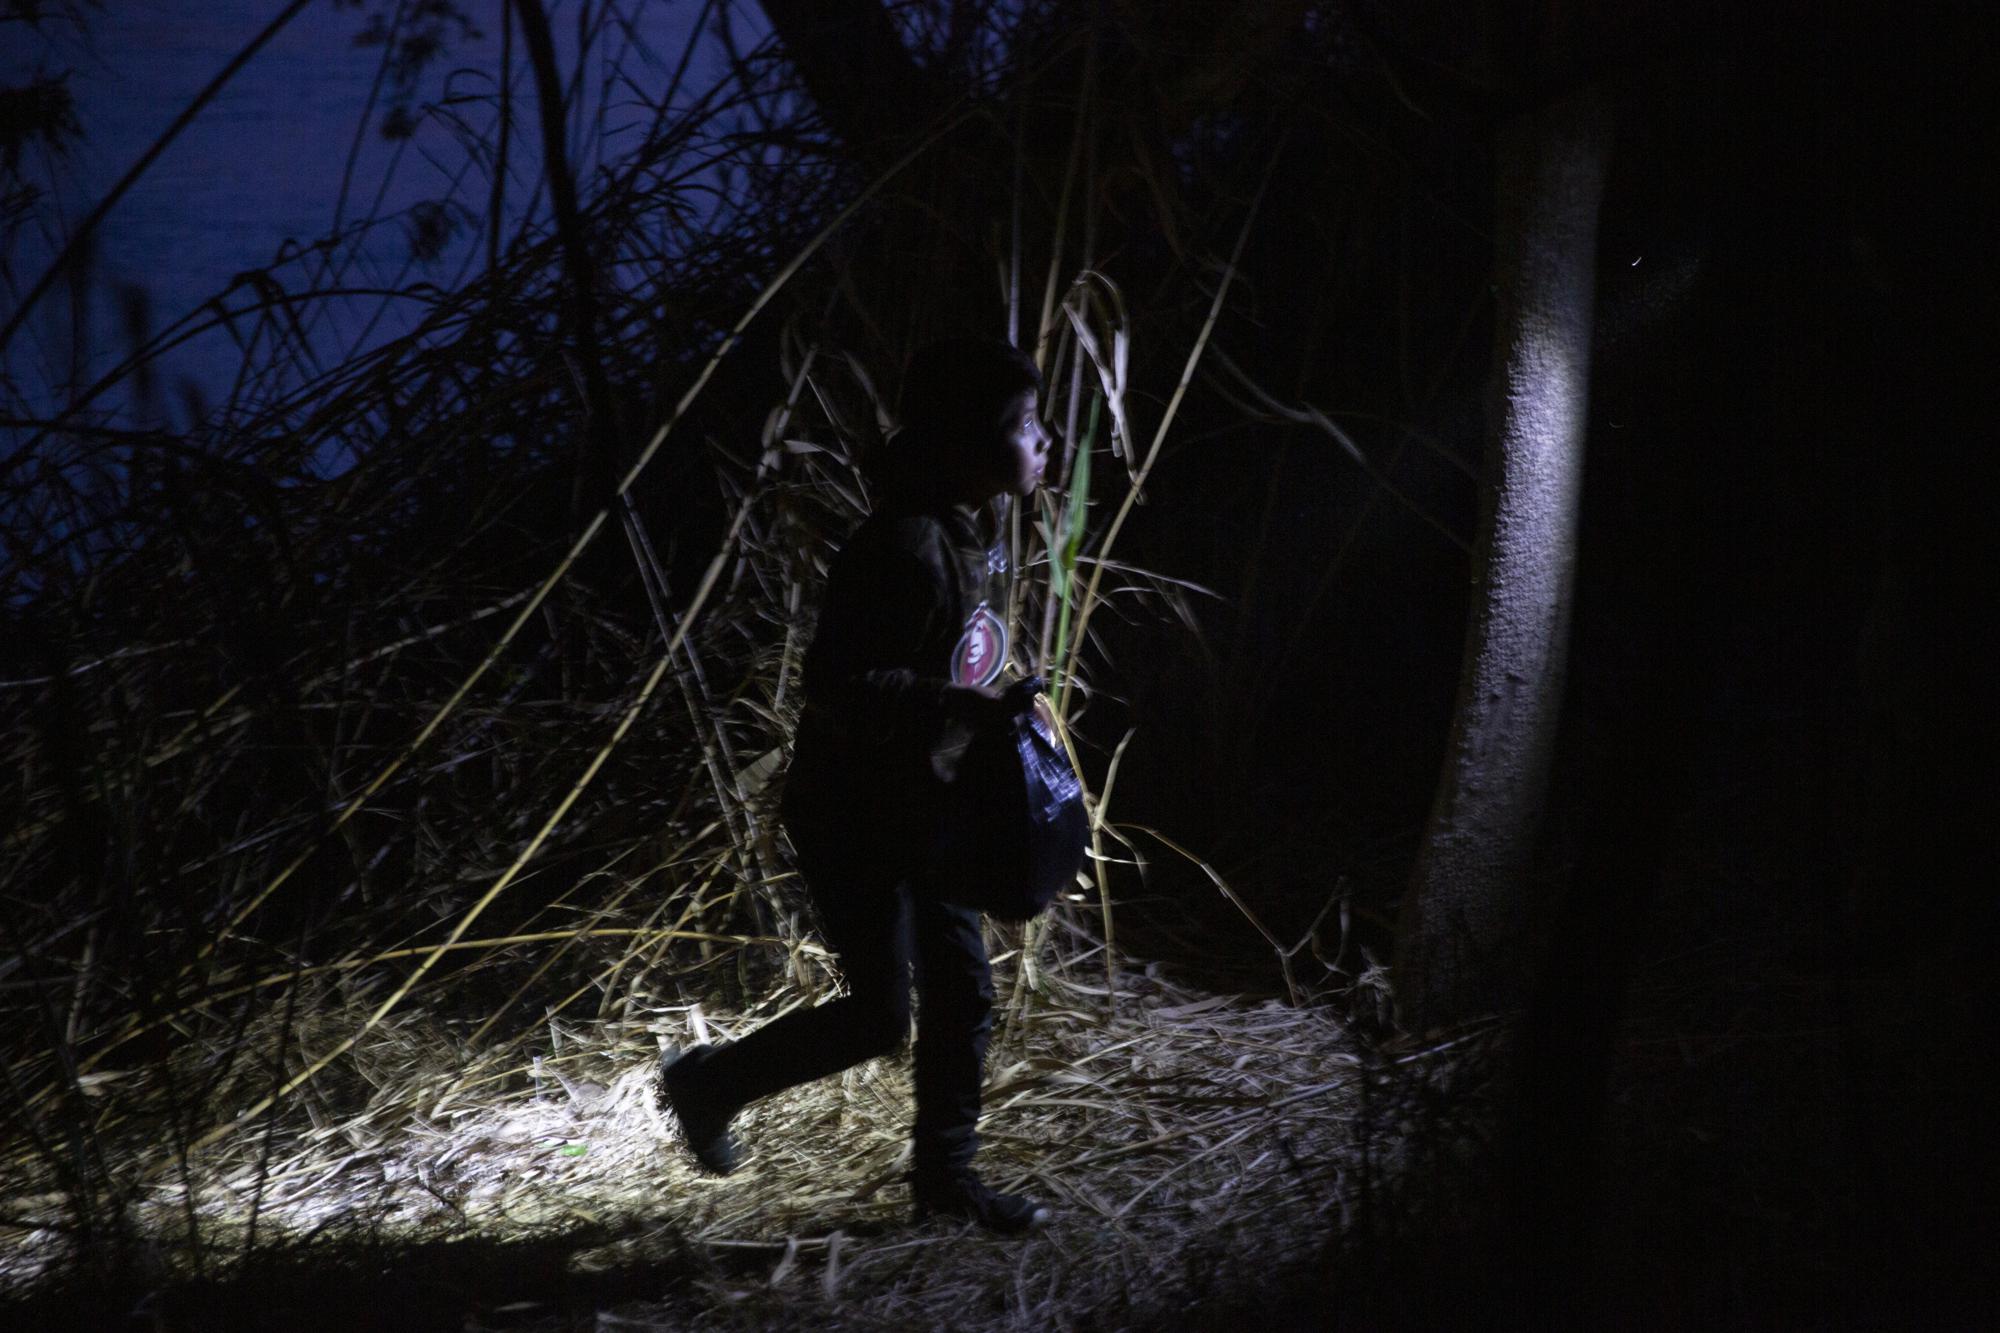 FILE - Young child walks alone through the brush after being smuggled across the Rio Grande river in Roma, Texas, March 24, 2021. Children traveling alone shattered previous highs in March, making up most of the more than 4,500 people housed in temporary tents that were designed for 250 under COVID-19 standards. (AP Photo/Dario Lopez-Mills, File)